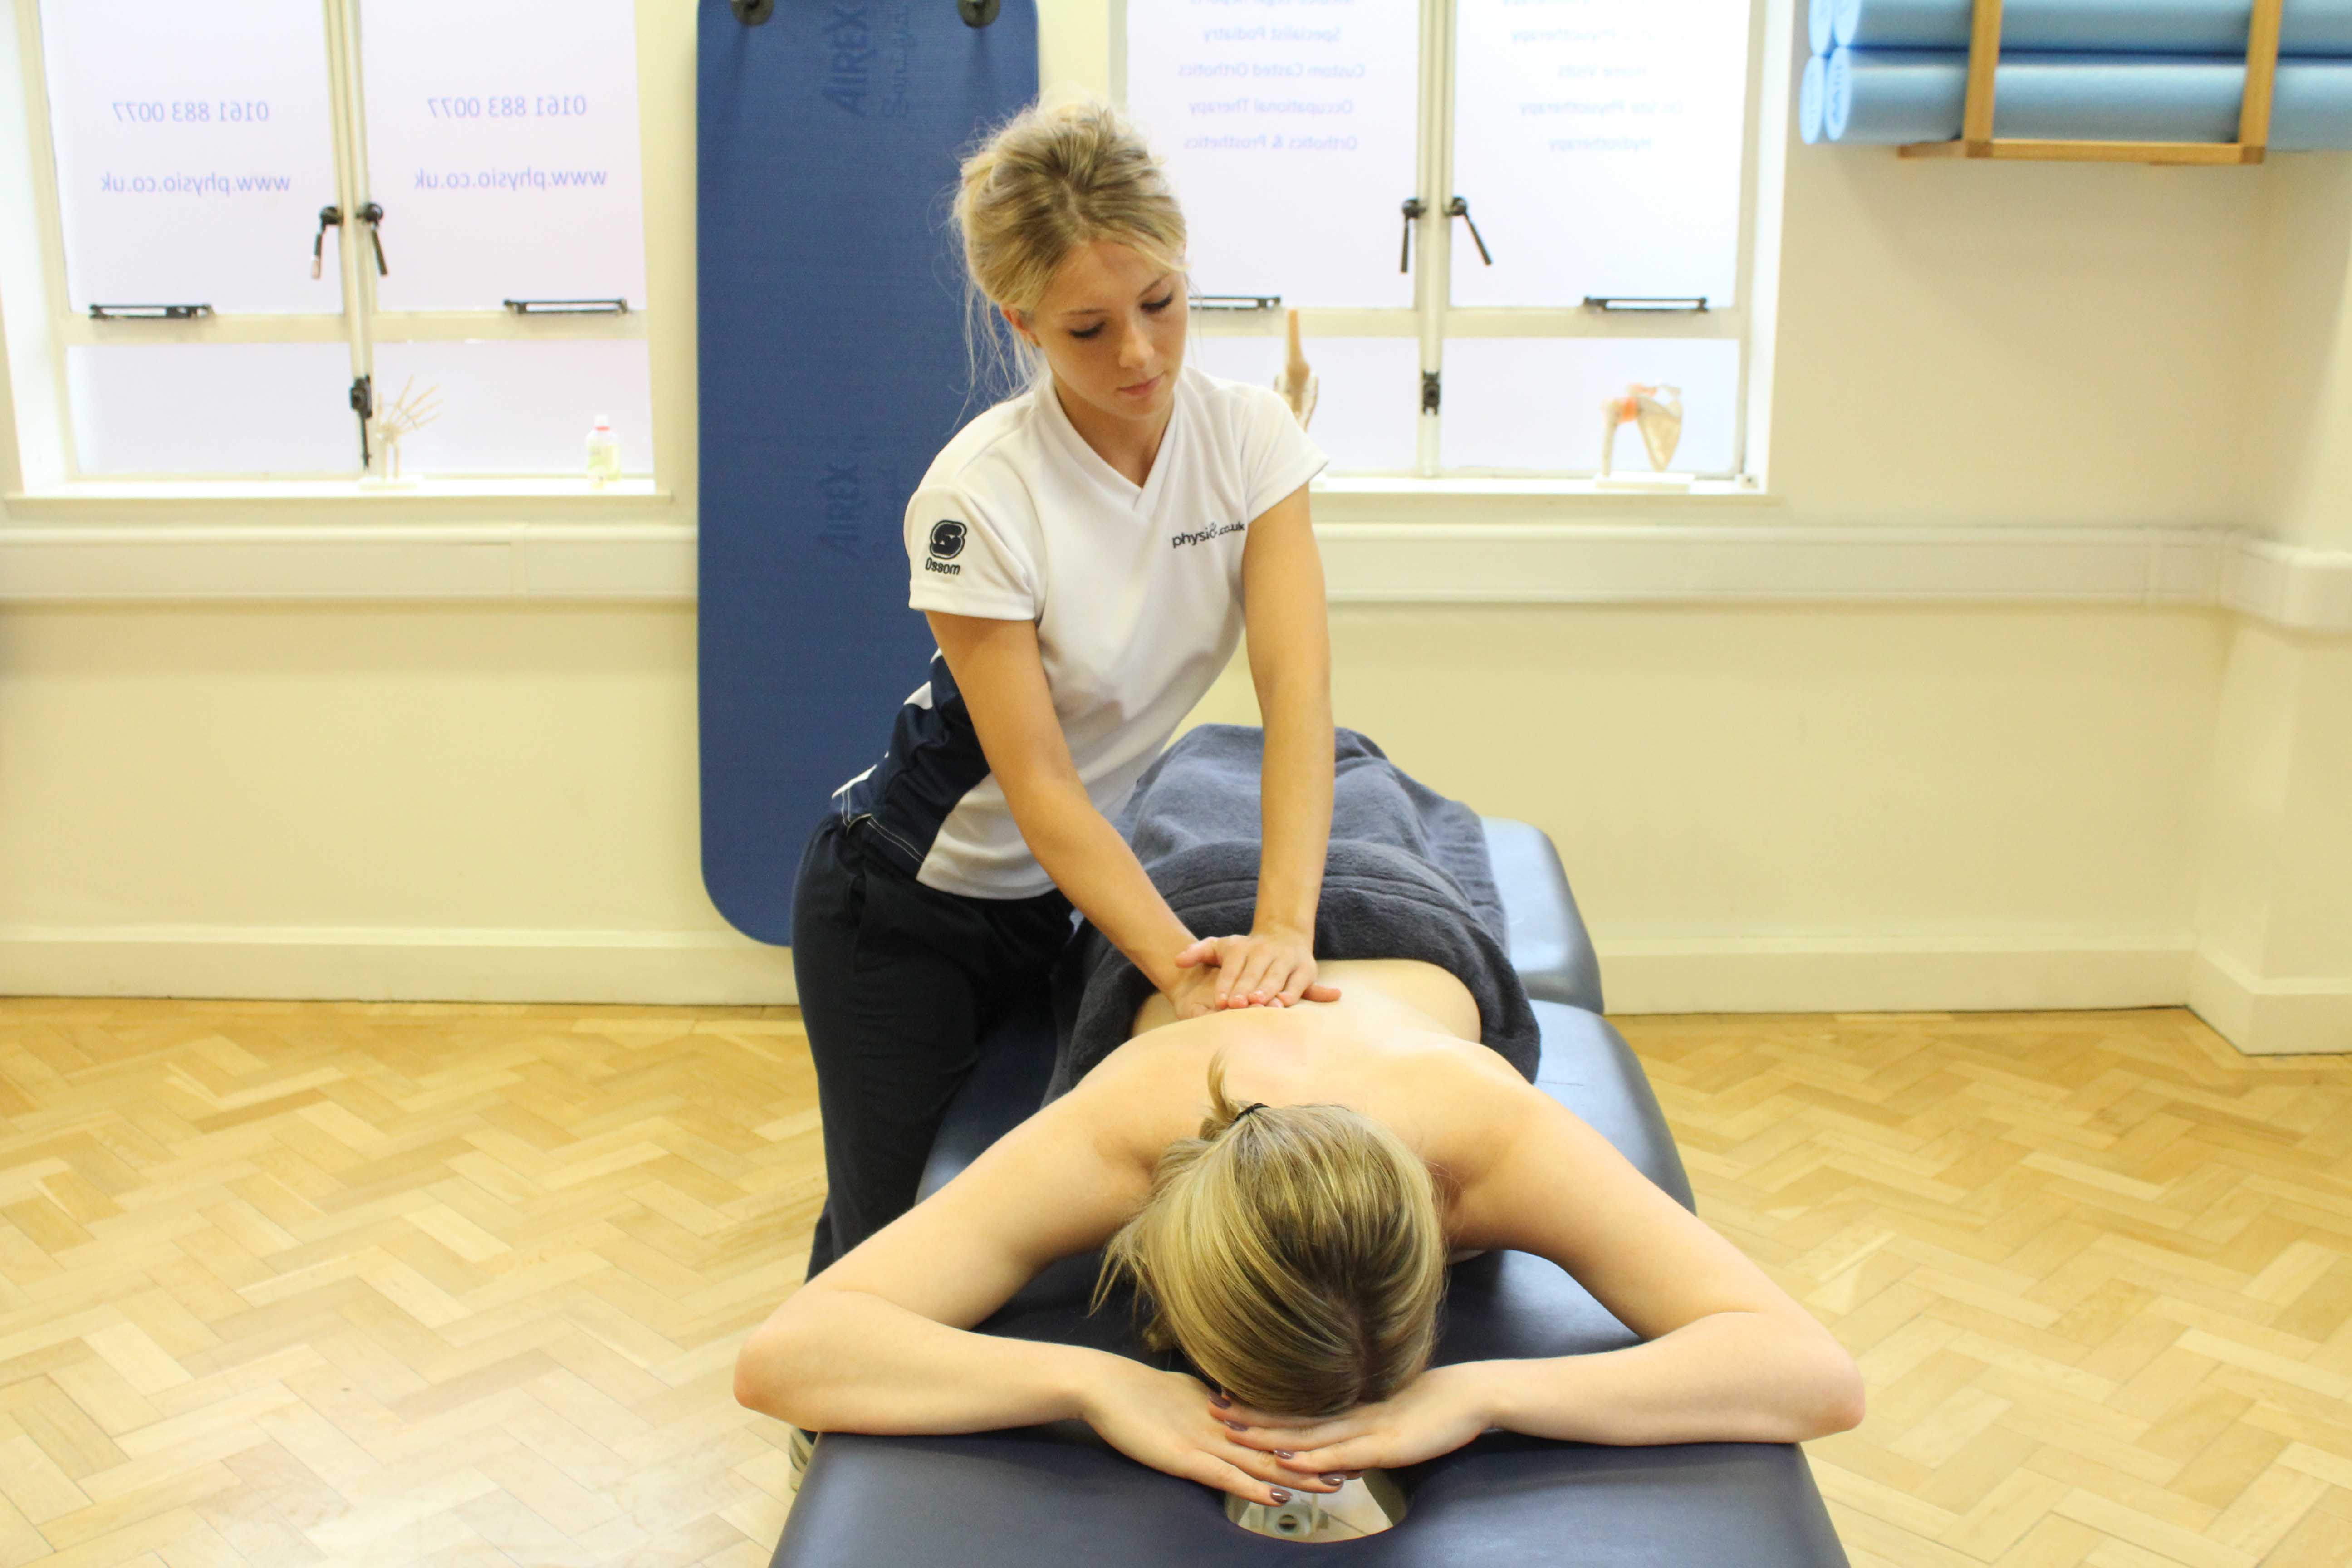 Beating percussion soft tissue massage applied by an experienced therapist